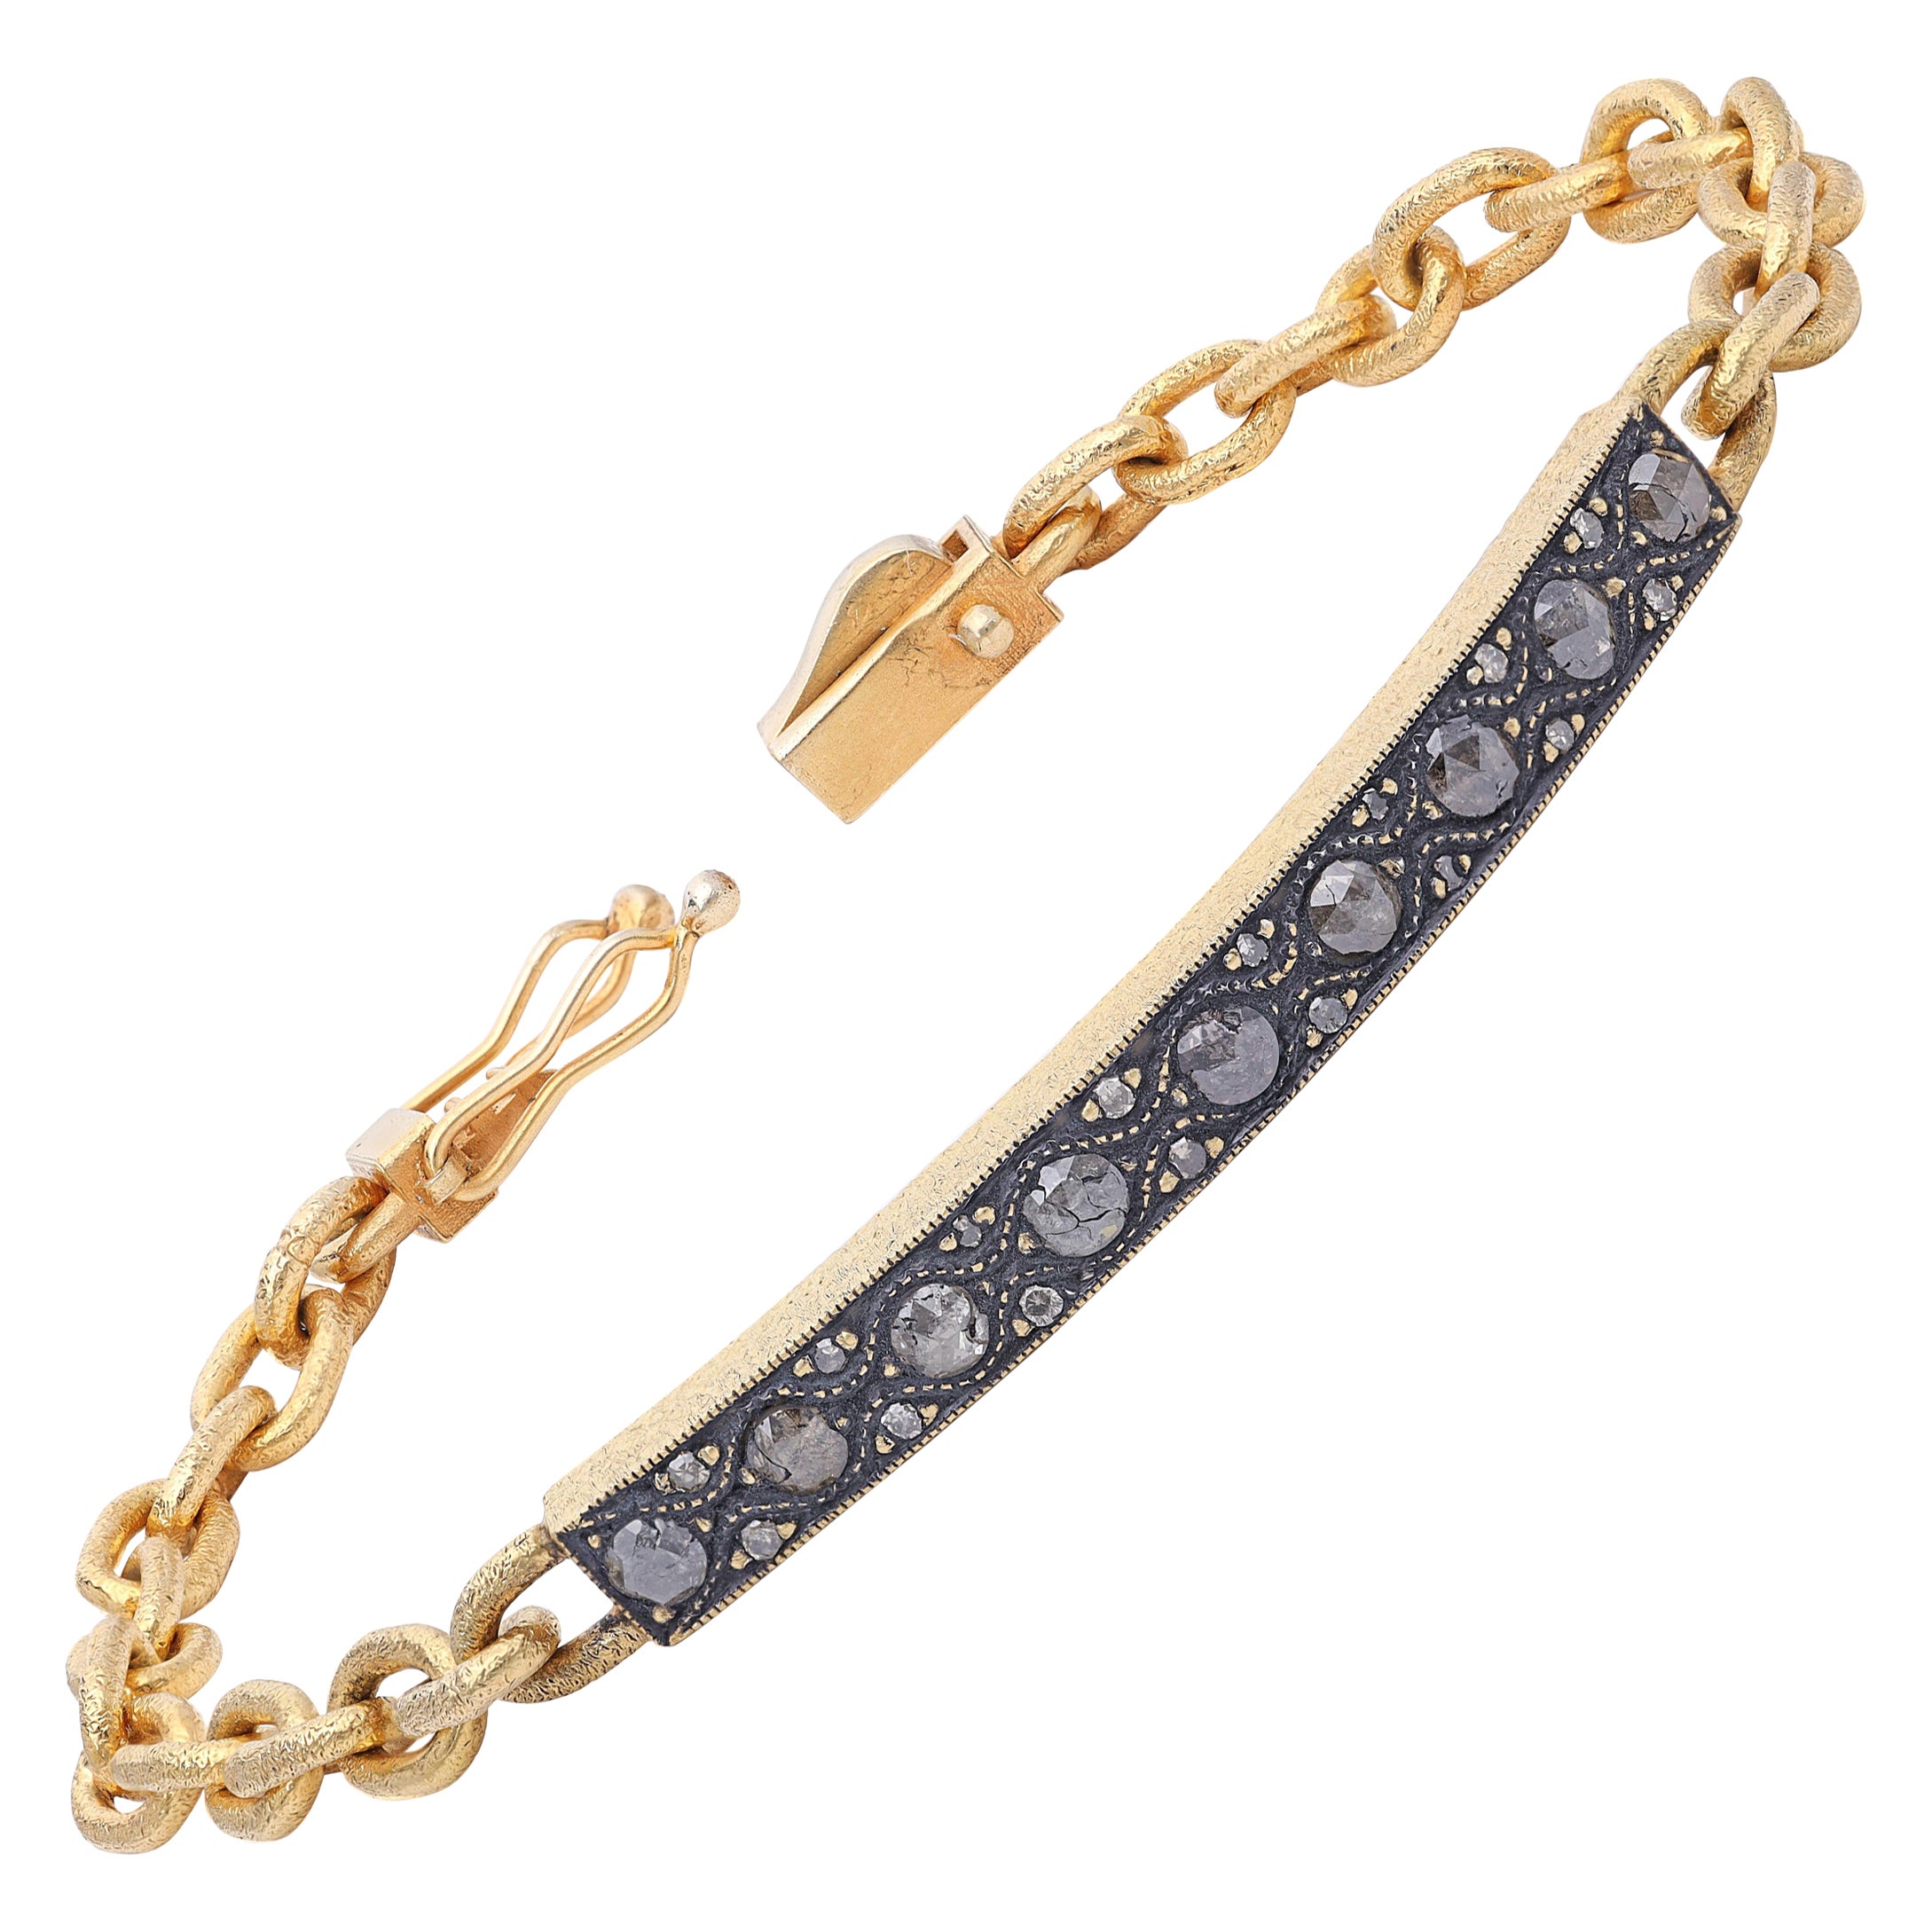 Silver and 24k Gold Micron Plated Tag Chain Bracelet with Rose Cut Diamonds